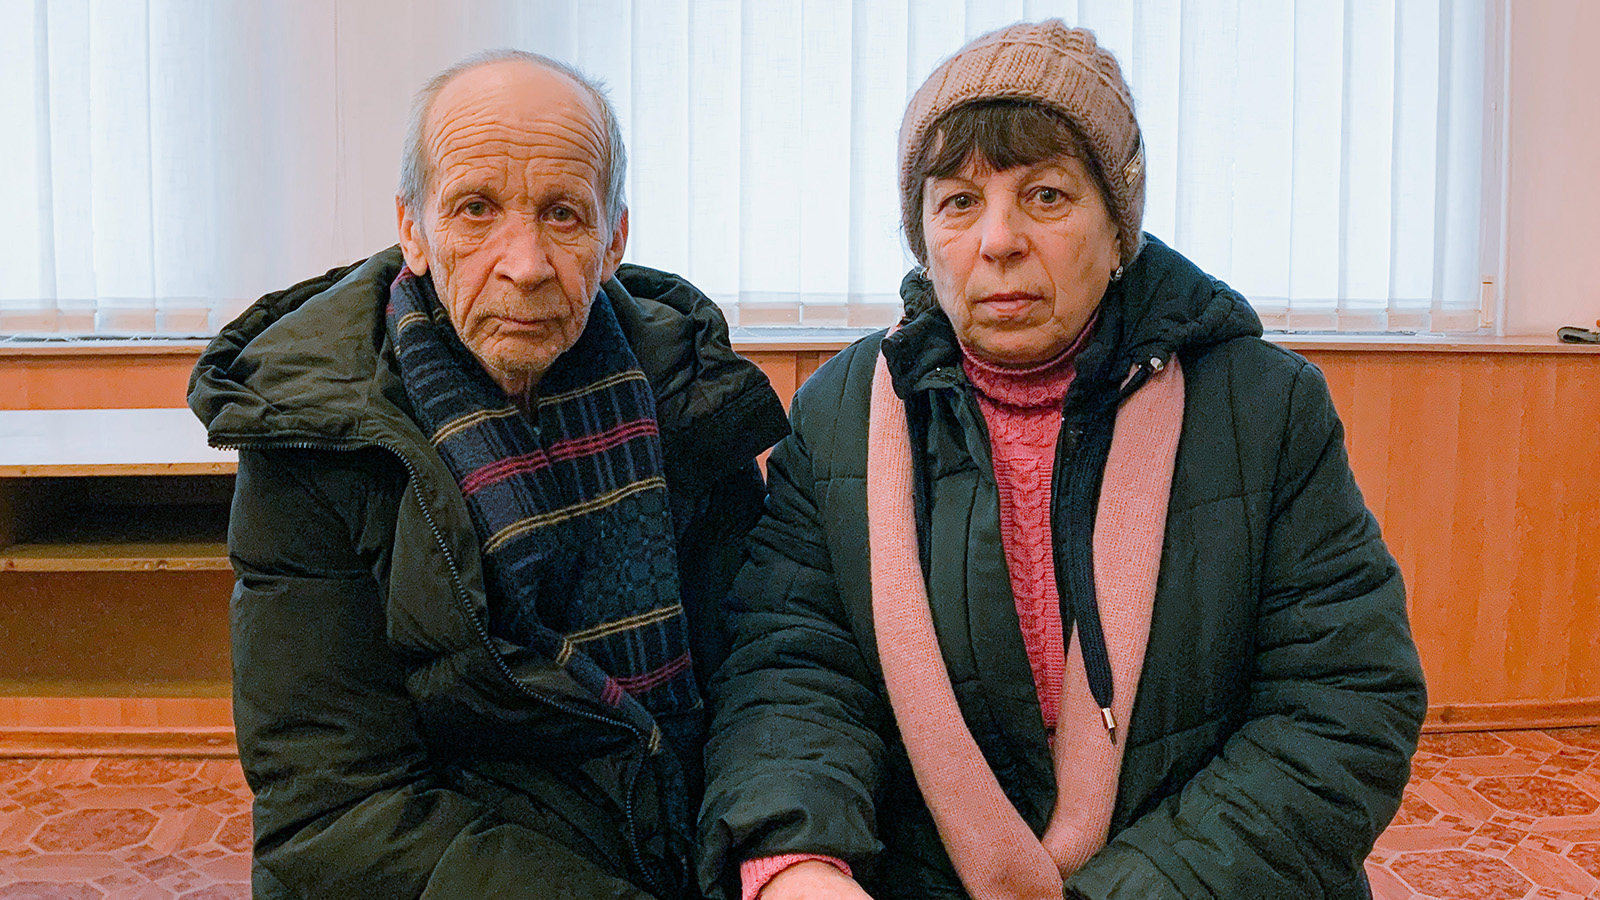 Olek* (70) and Veronica* (65) have been married for 45 years. They were forced to flee their home in Polohy after it was taken by Russian forces, and have been living in displacement in Zaporizhzhia since April, 2022. 